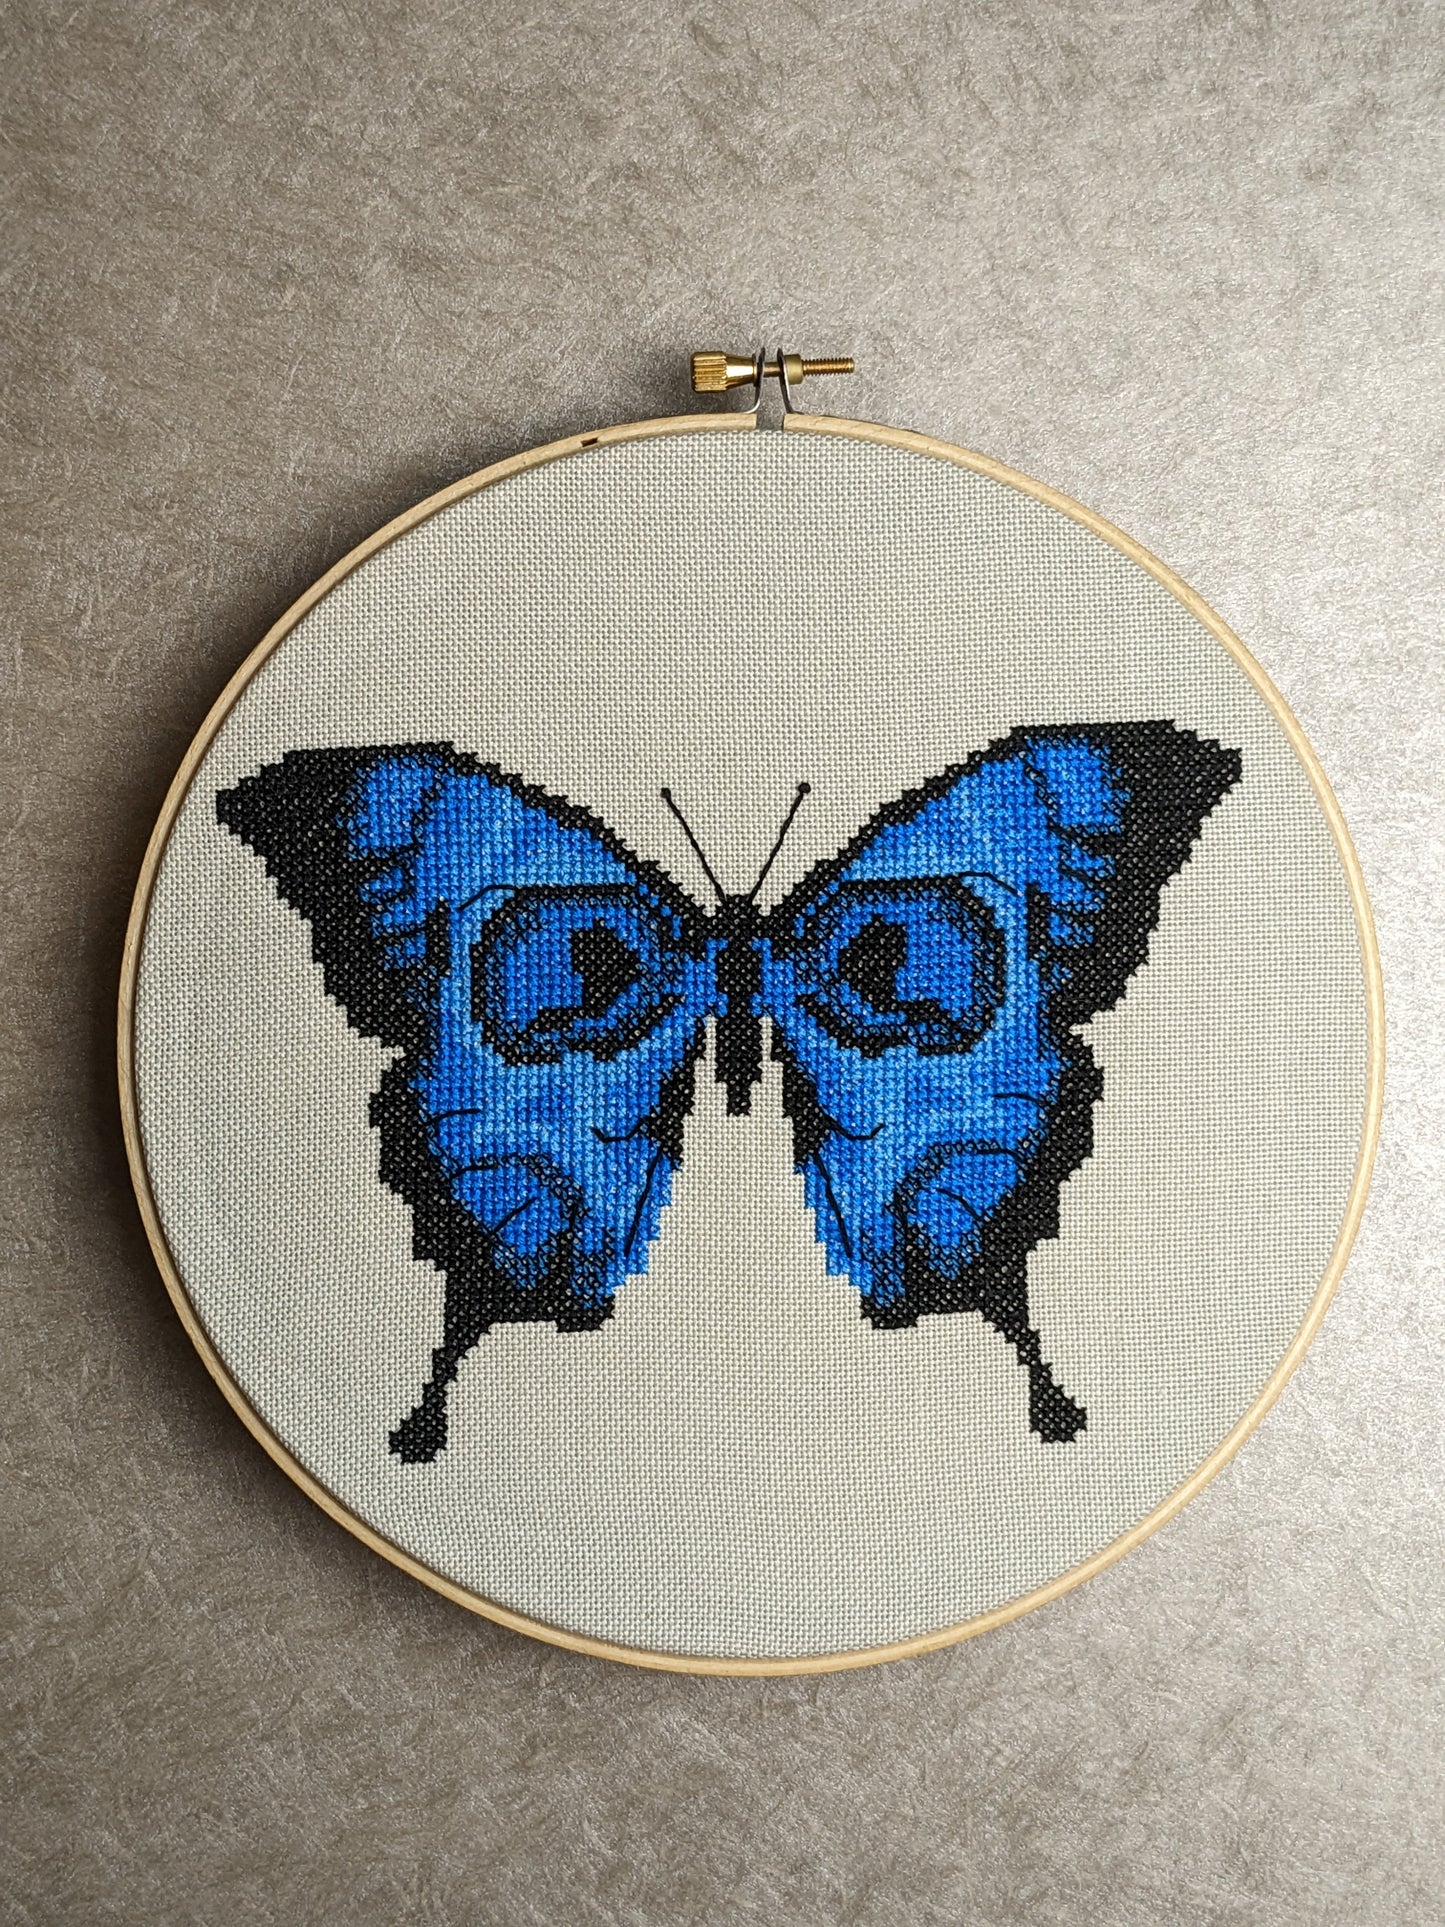 Memento Mori Skull and Butterfly cross stitch pattern - Instant PDF download